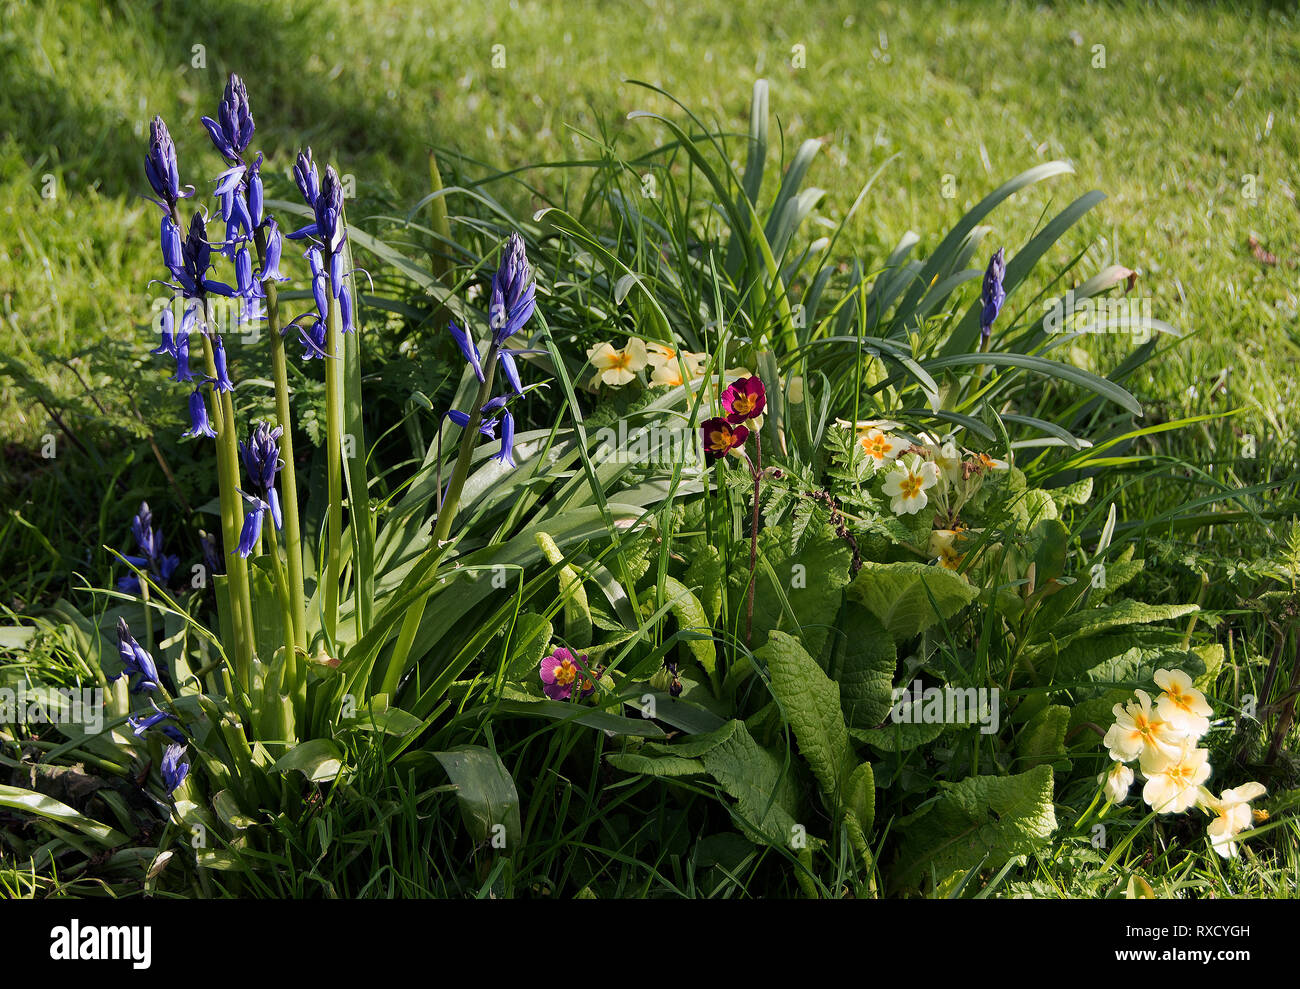 Bluebells,Hyacinthoides non-scripta and red and yellow primroses primula veris in an orchard garden Stock Photo